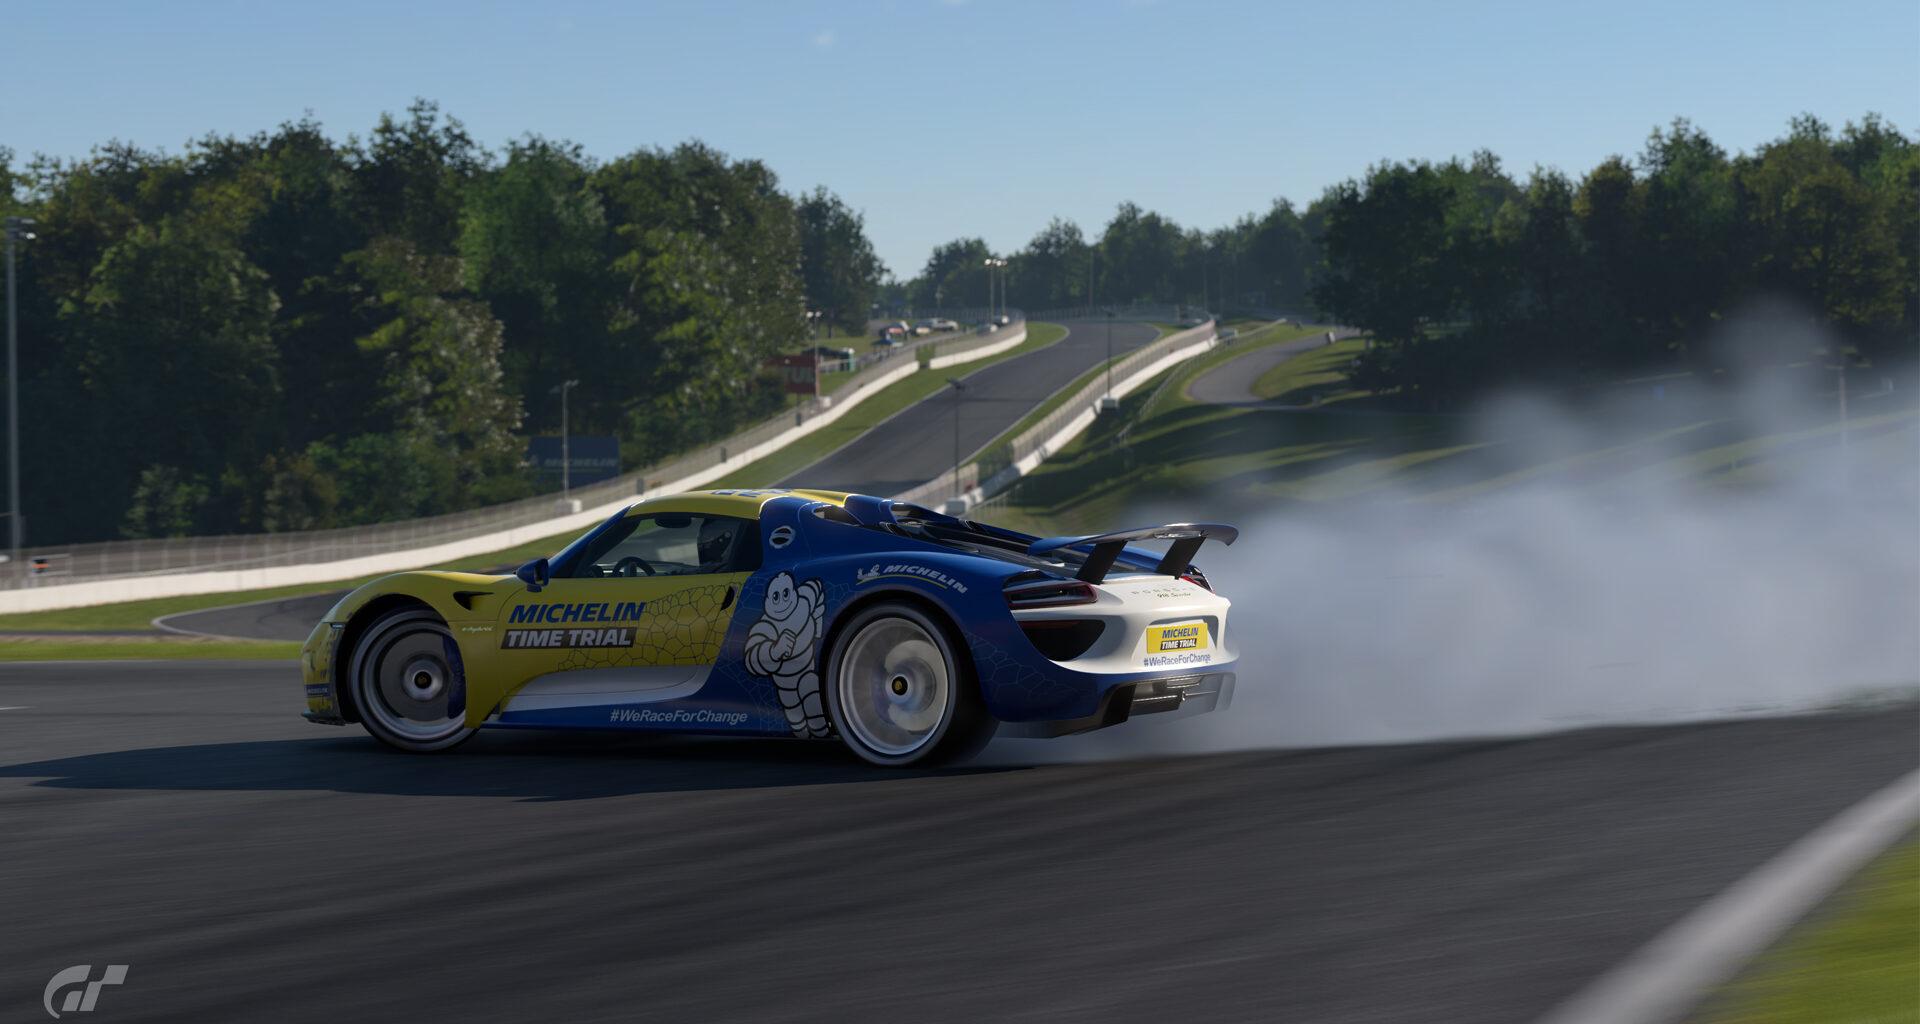 Gran Turismo 7's Michelin Challenge live, World Final trip and livery up for grabs